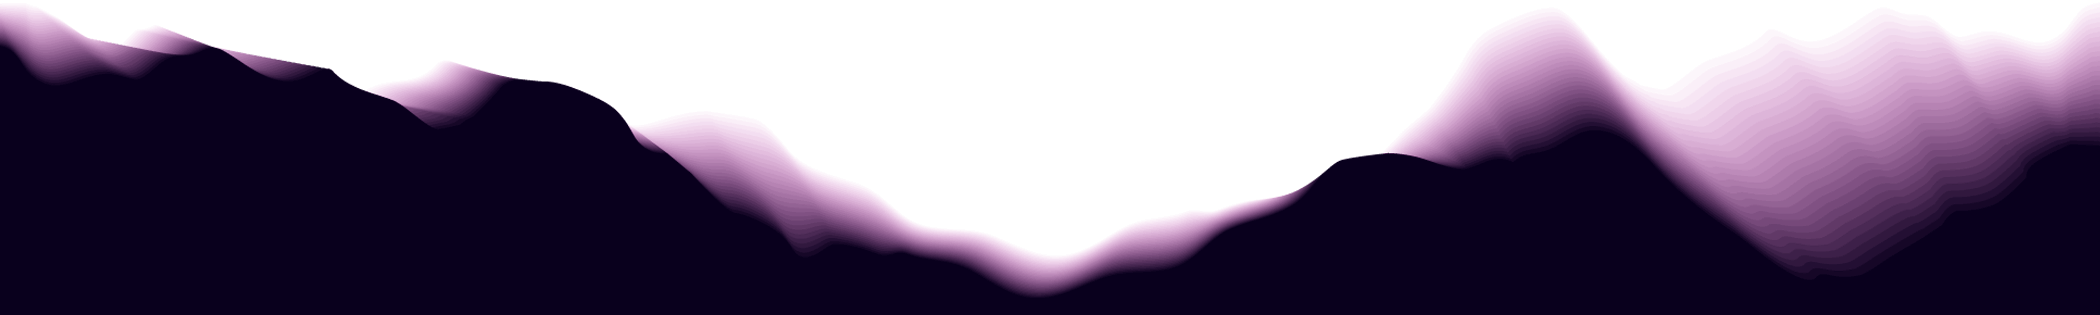 http://www.marabout-nana.fr/wp-content/uploads/2018/05/purple_top_divider.png